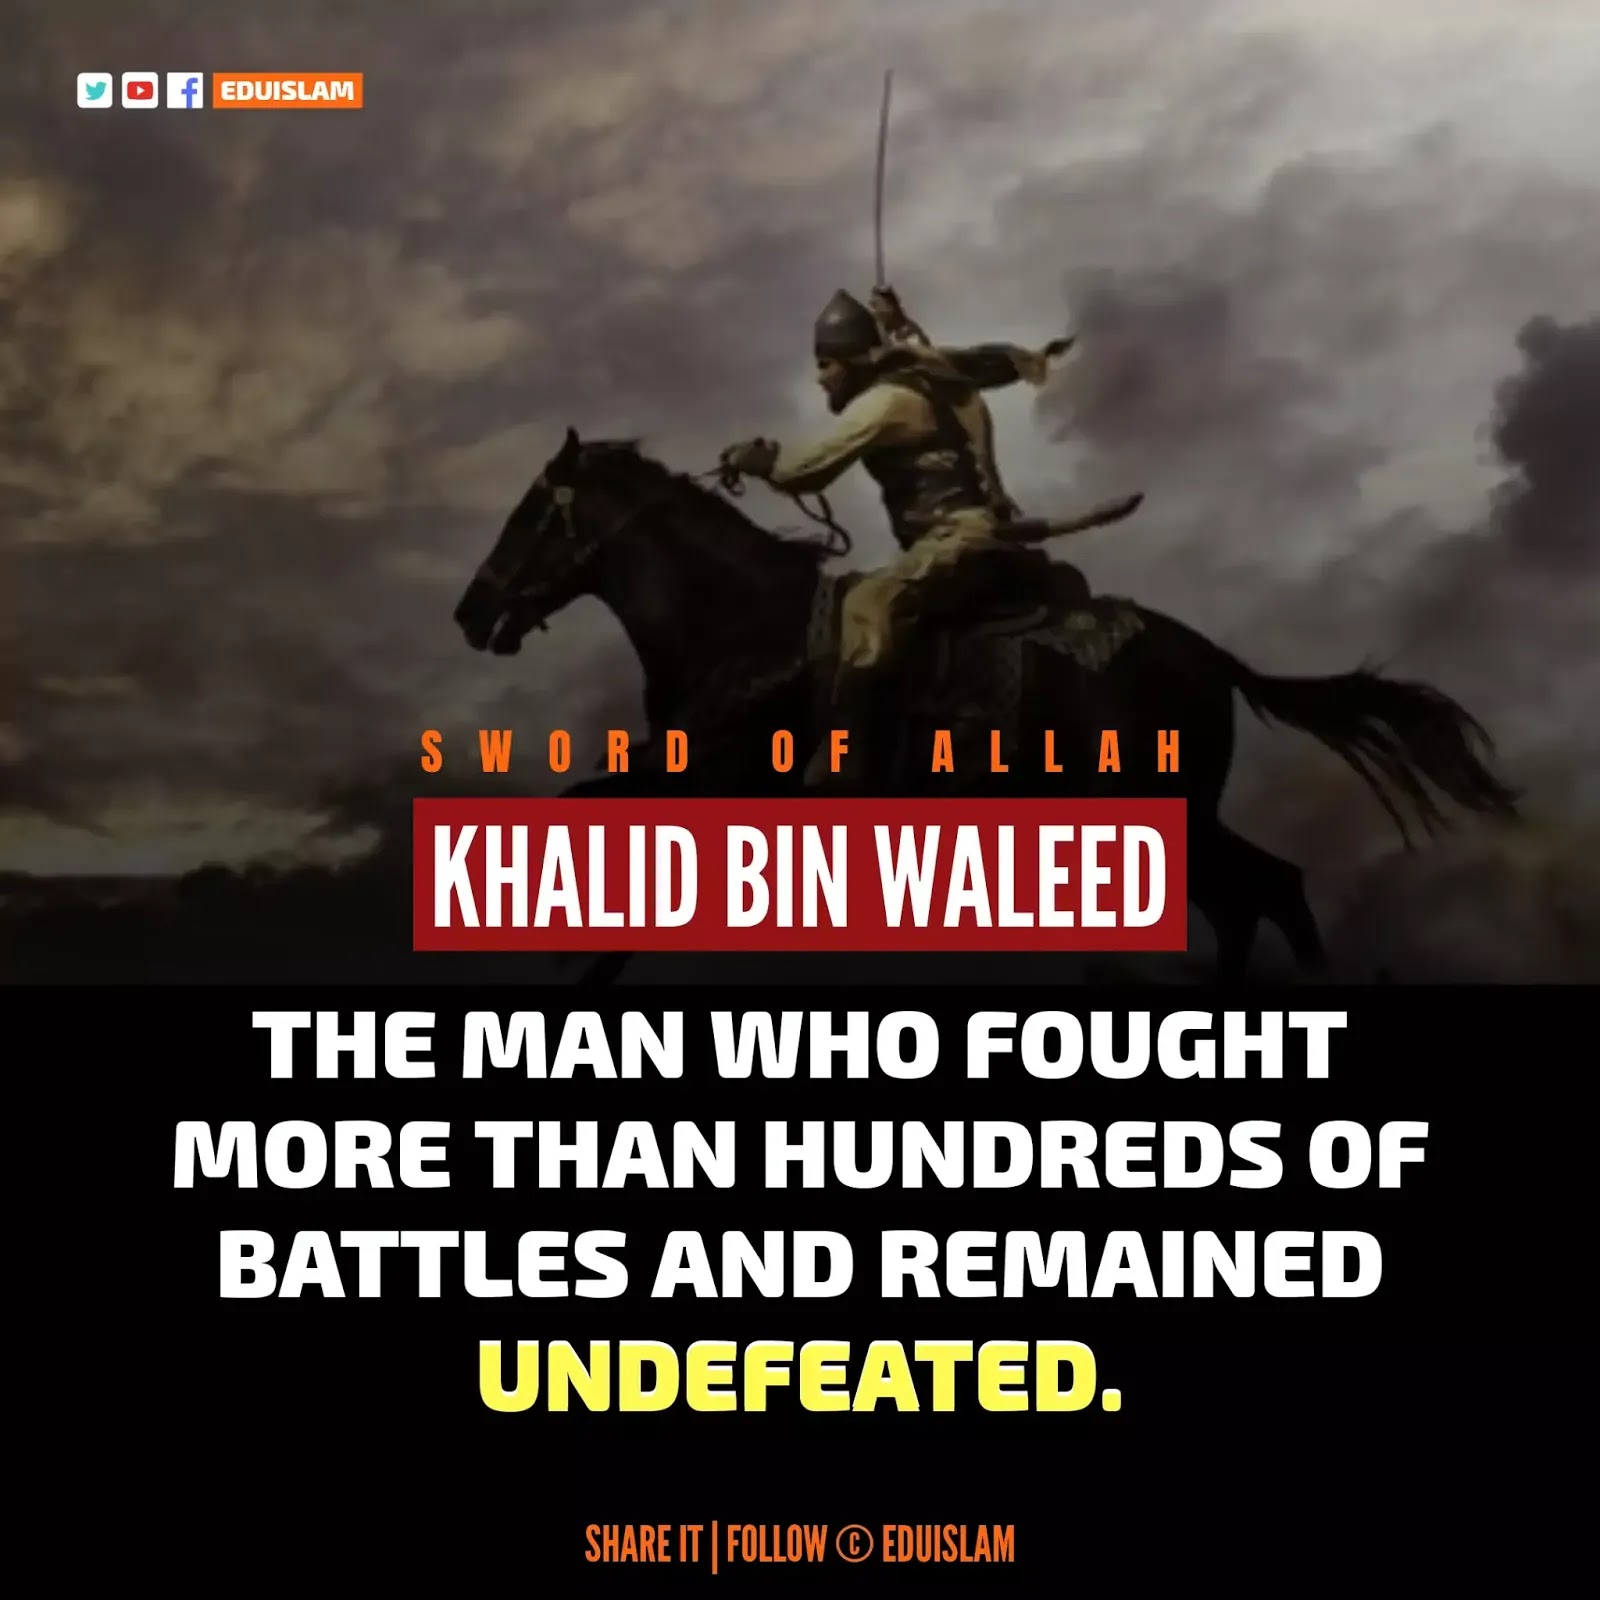 No One Could Defeat Khalid Bin Waleed - 10 Incredible Facts